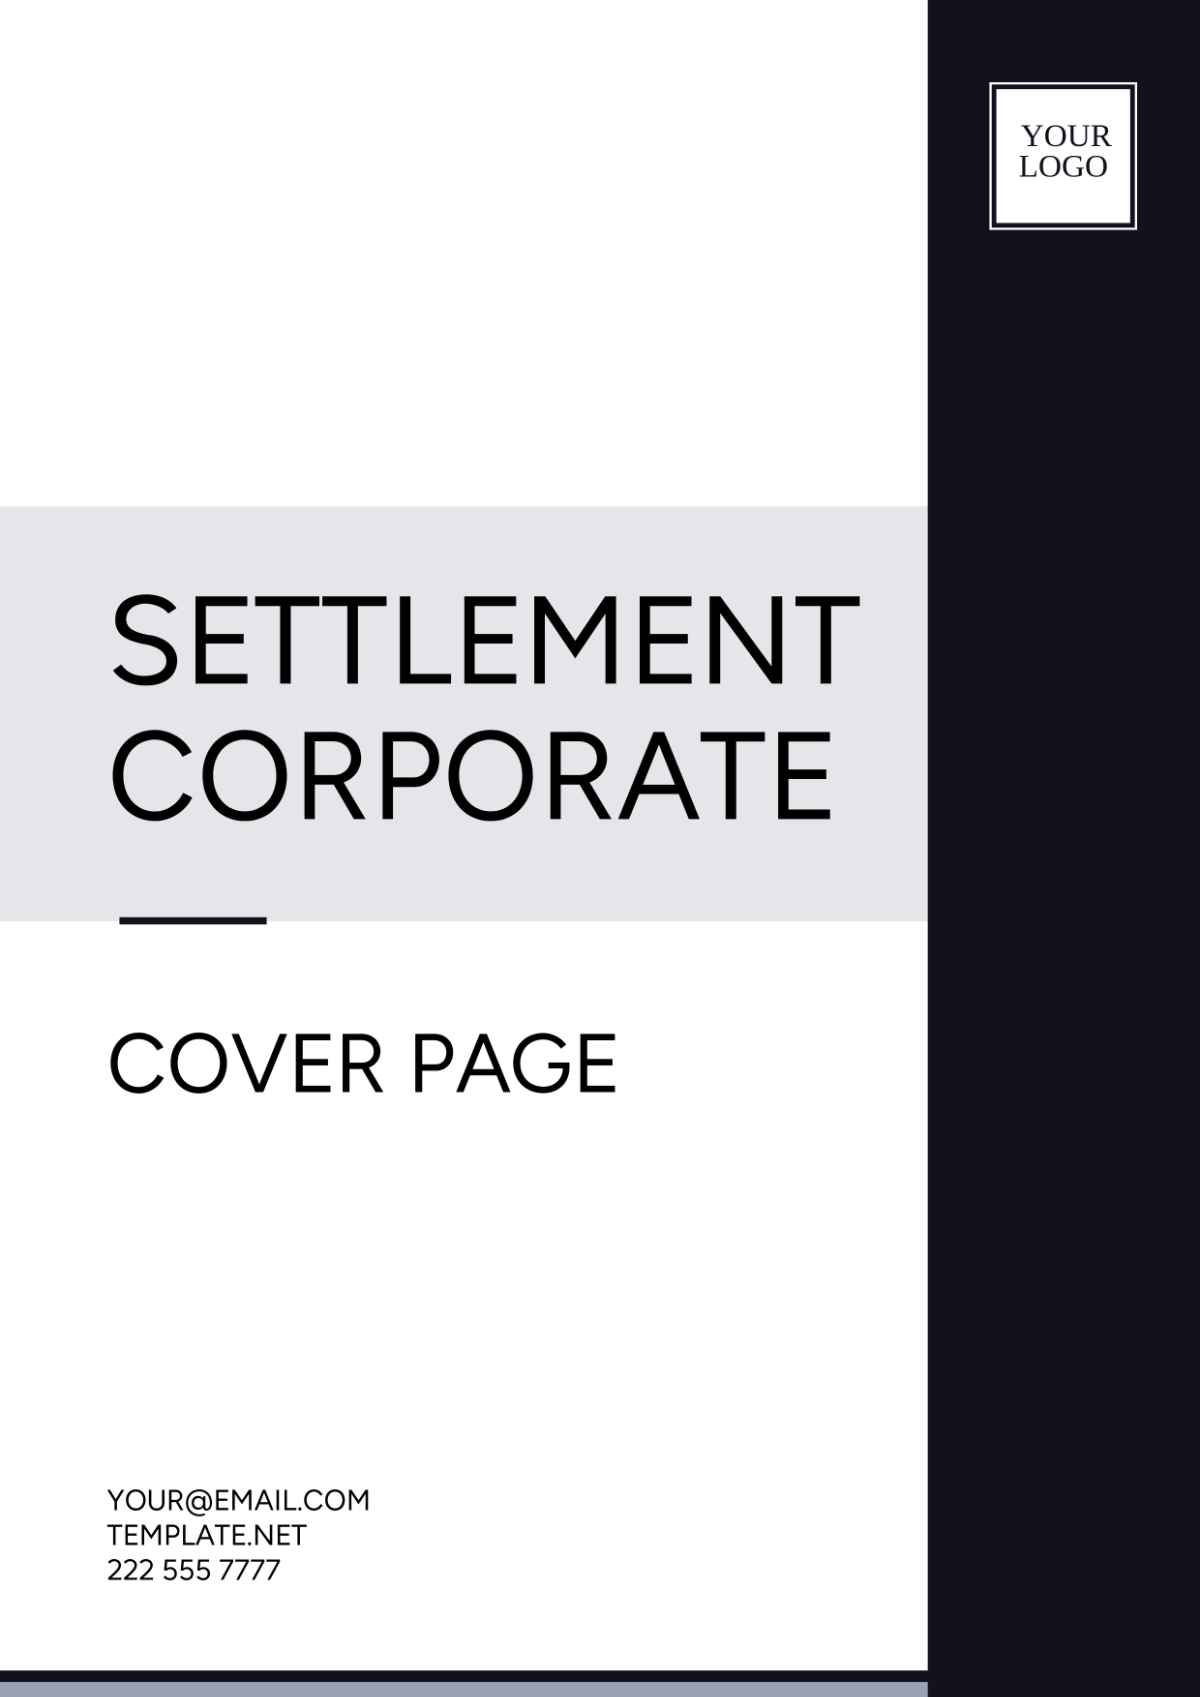 Settlement Corporate Cover Page Template